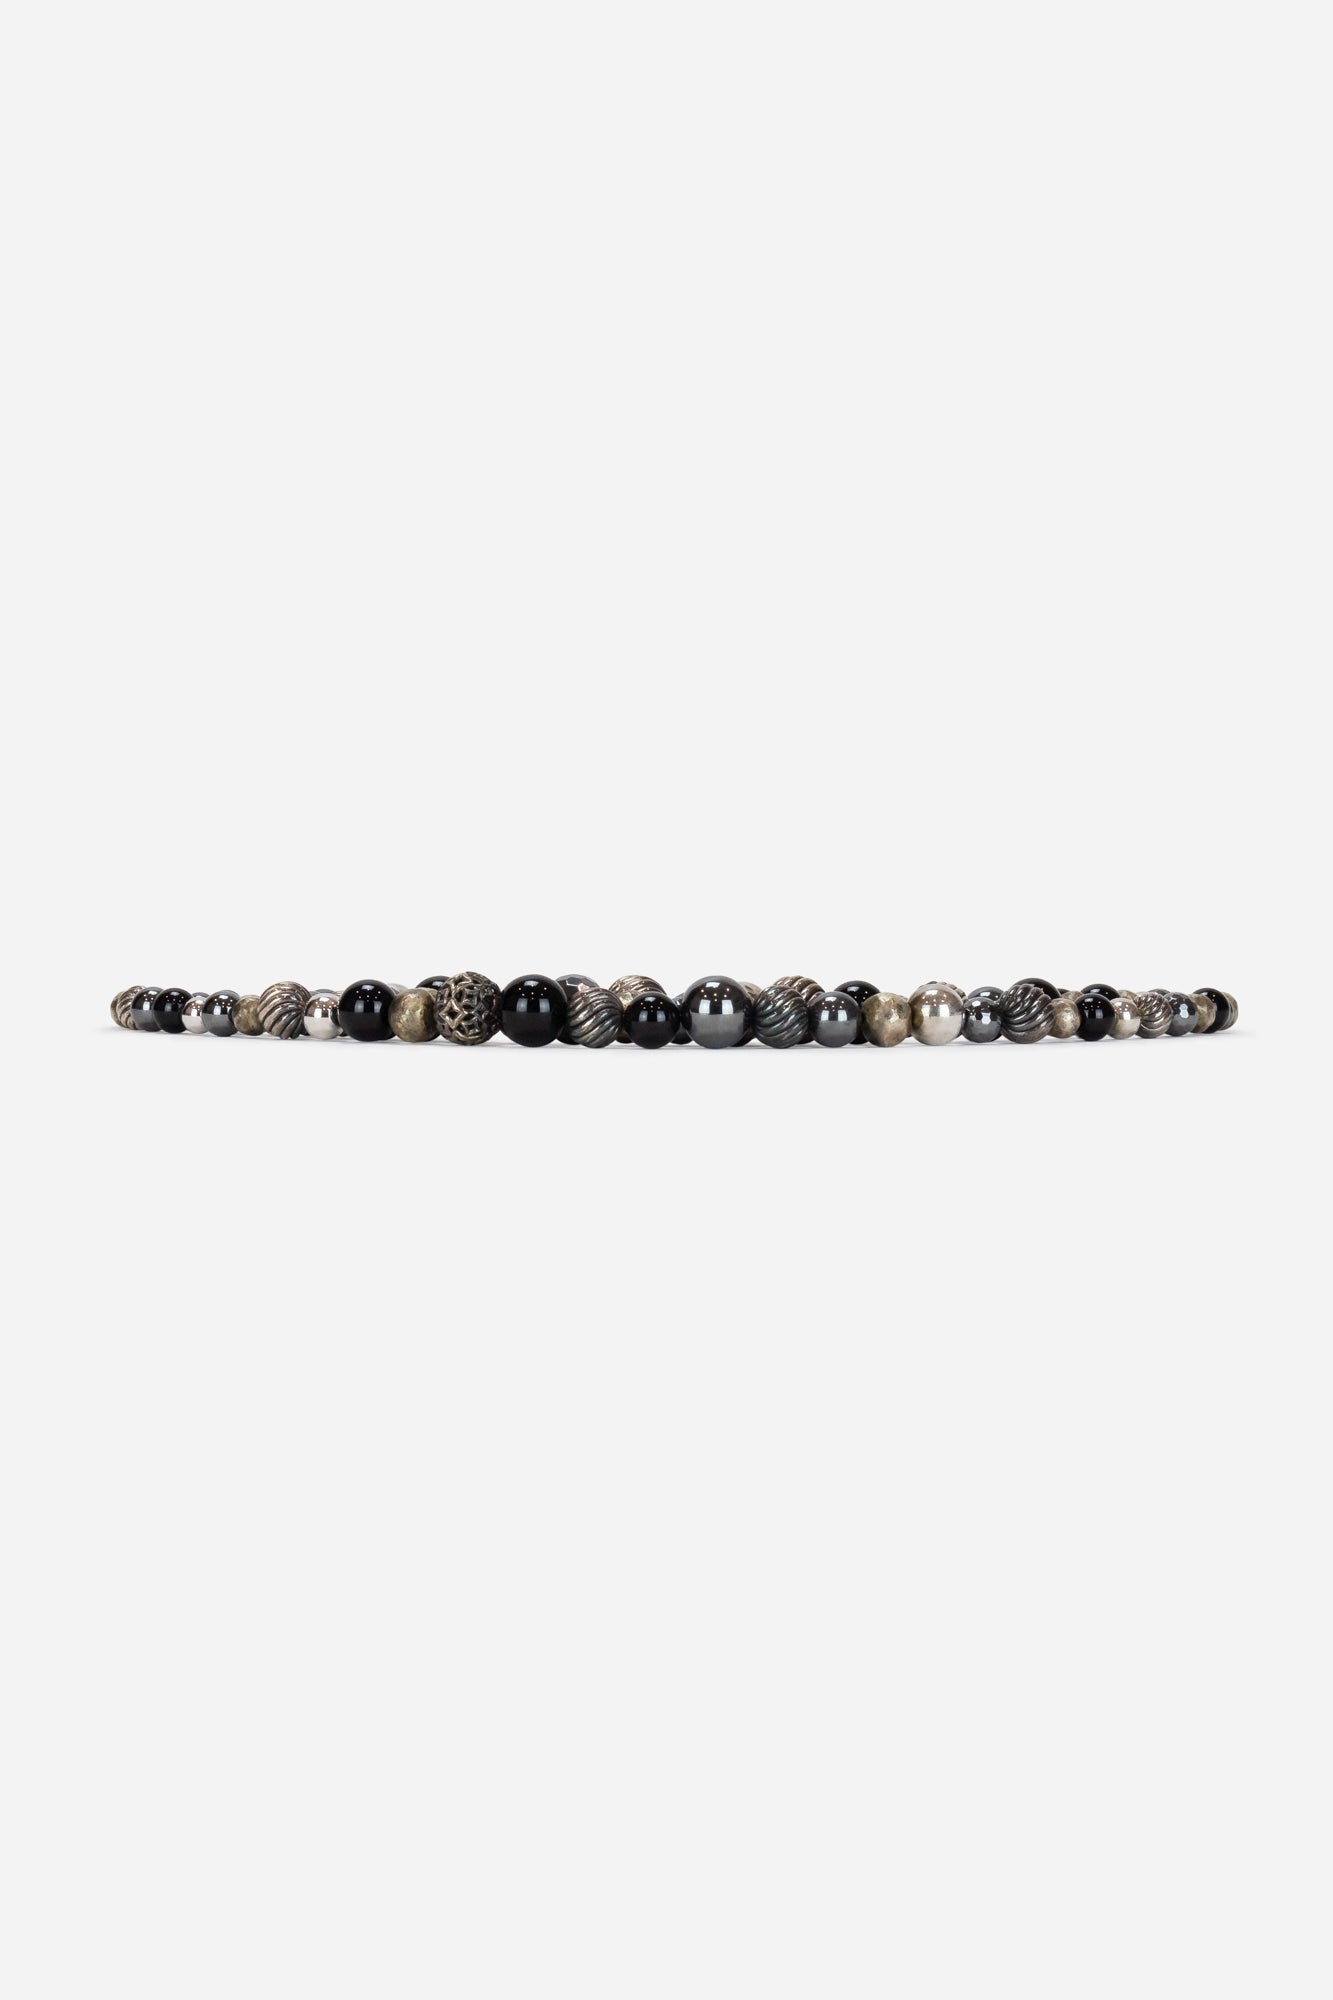 Silver, Onyx and Hematite Three Row Multi Strand Elements Toggle Necklace